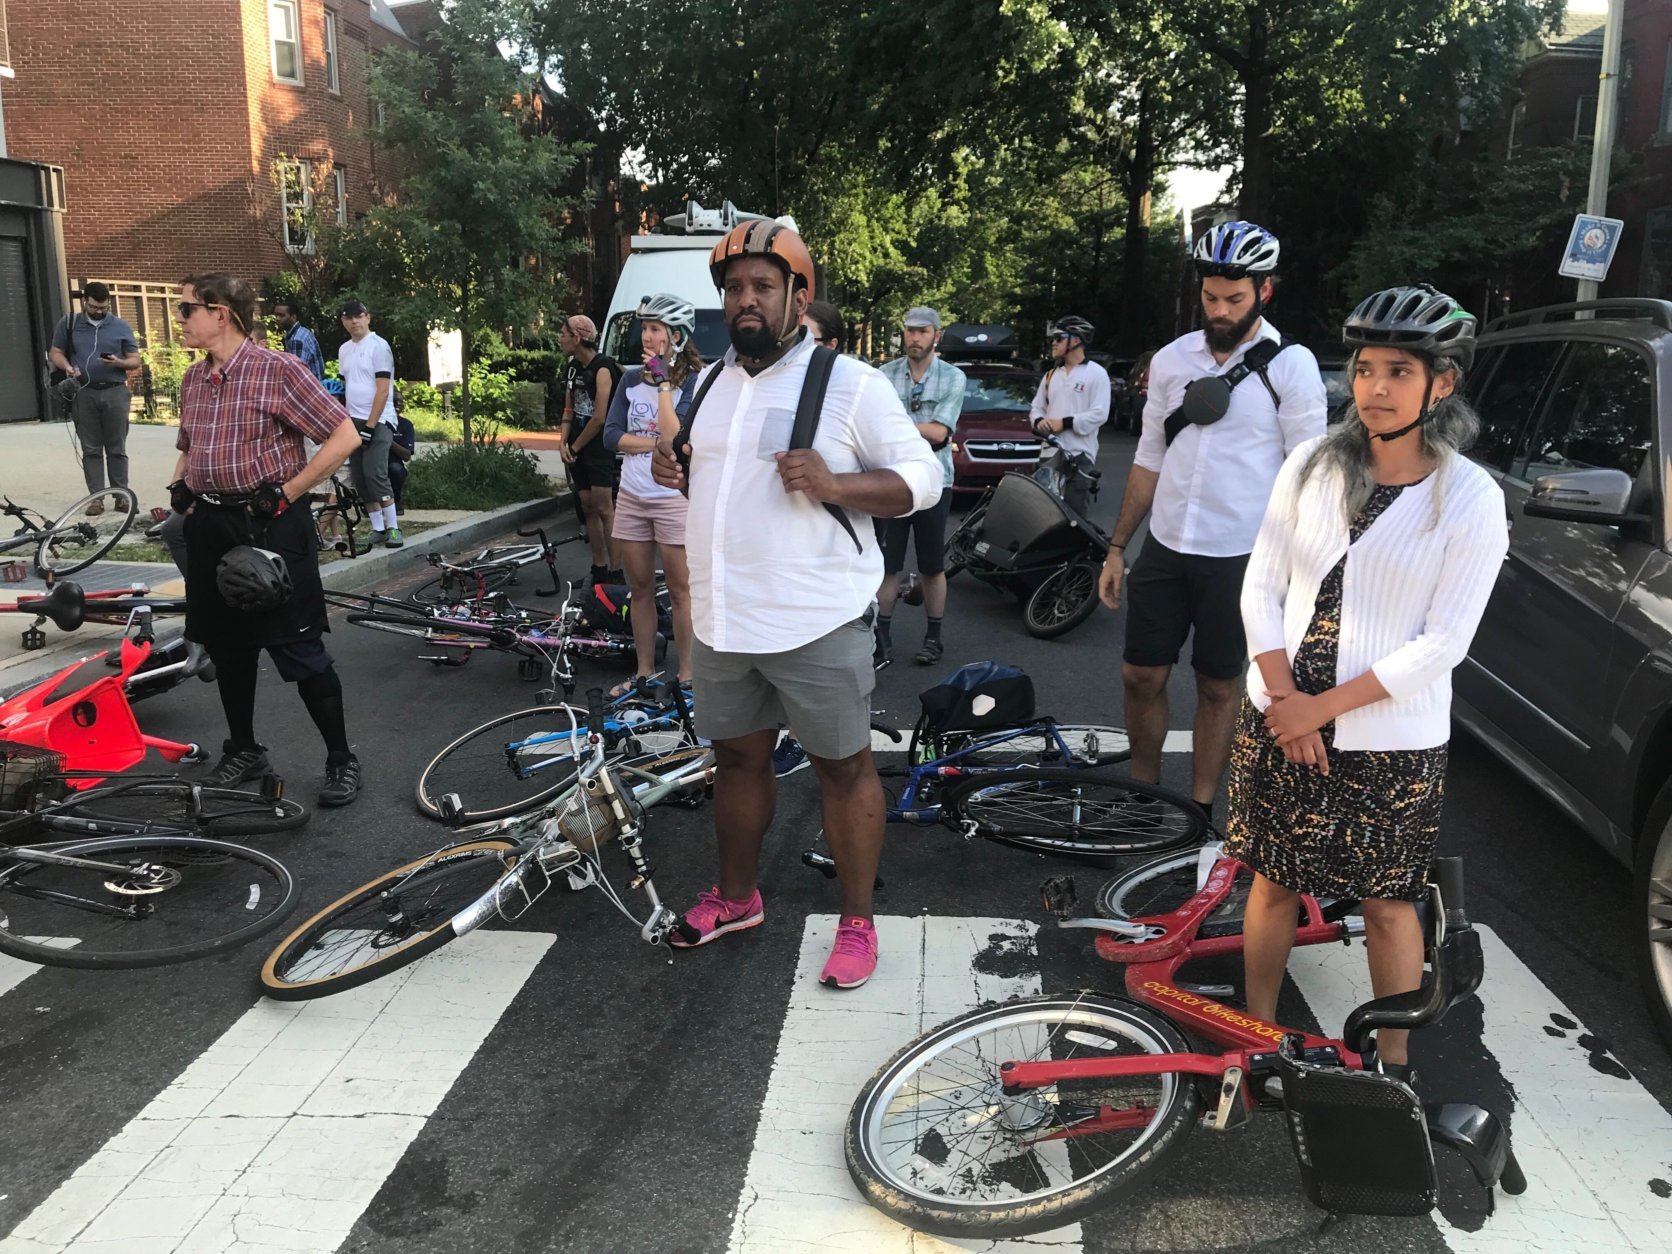 During the Tuesday evening rush hour, dozens of bicyclists laid down their bikes in a brief, silent protest around H and 3rd streets in Northeast D.C. (WTOP/Dick Uliano)